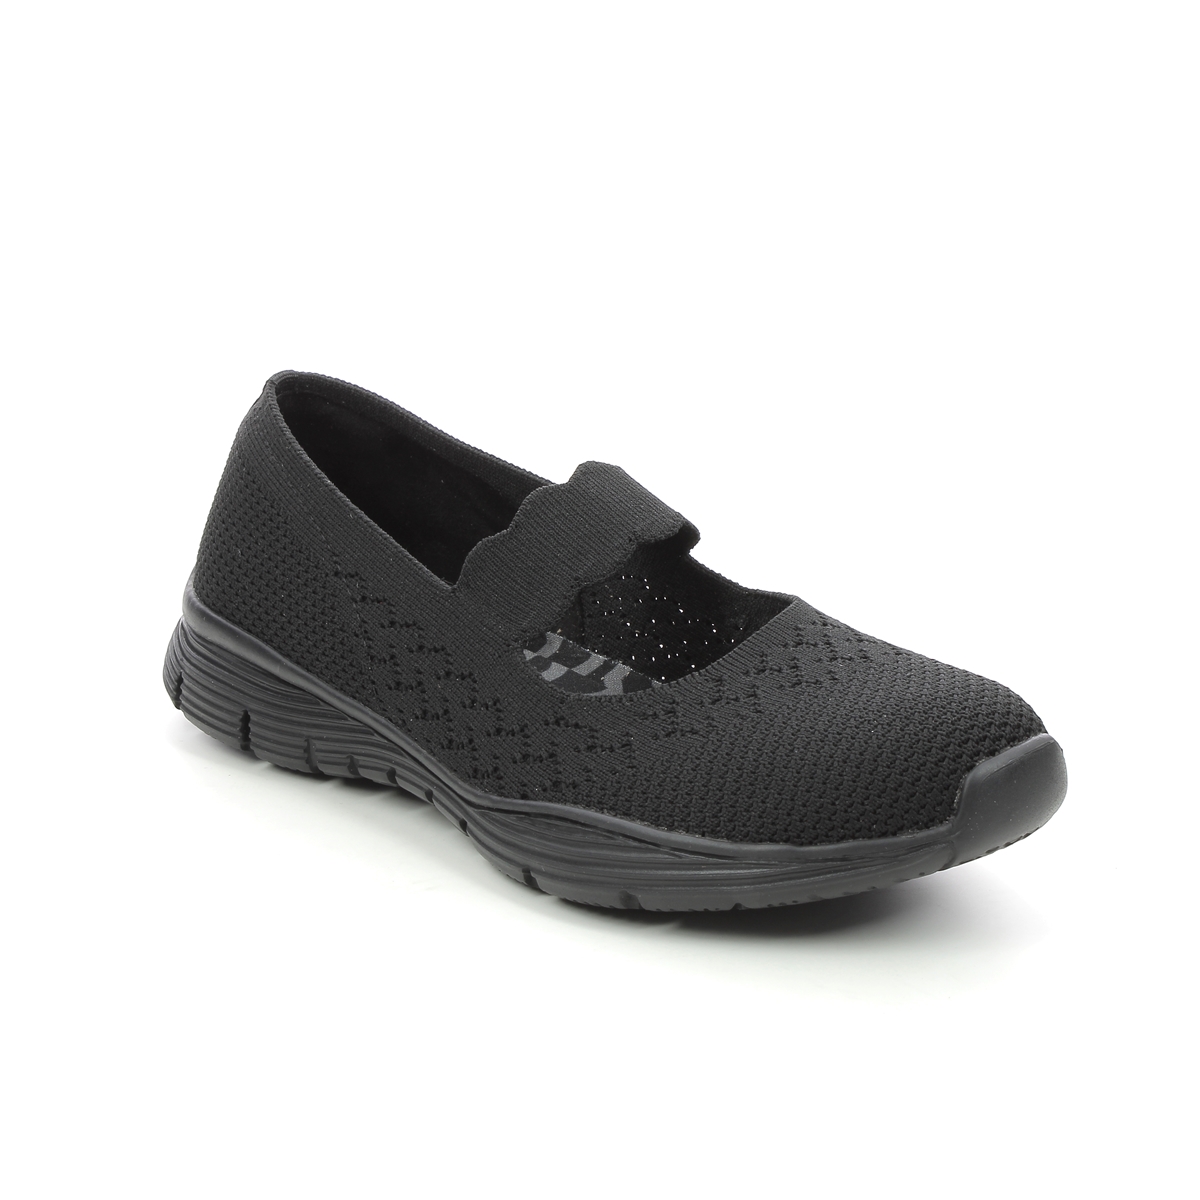 Skechers Seager Power BBK Black Womens Mary Jane Shoes 49622 in a Plain Man-made in Size 4